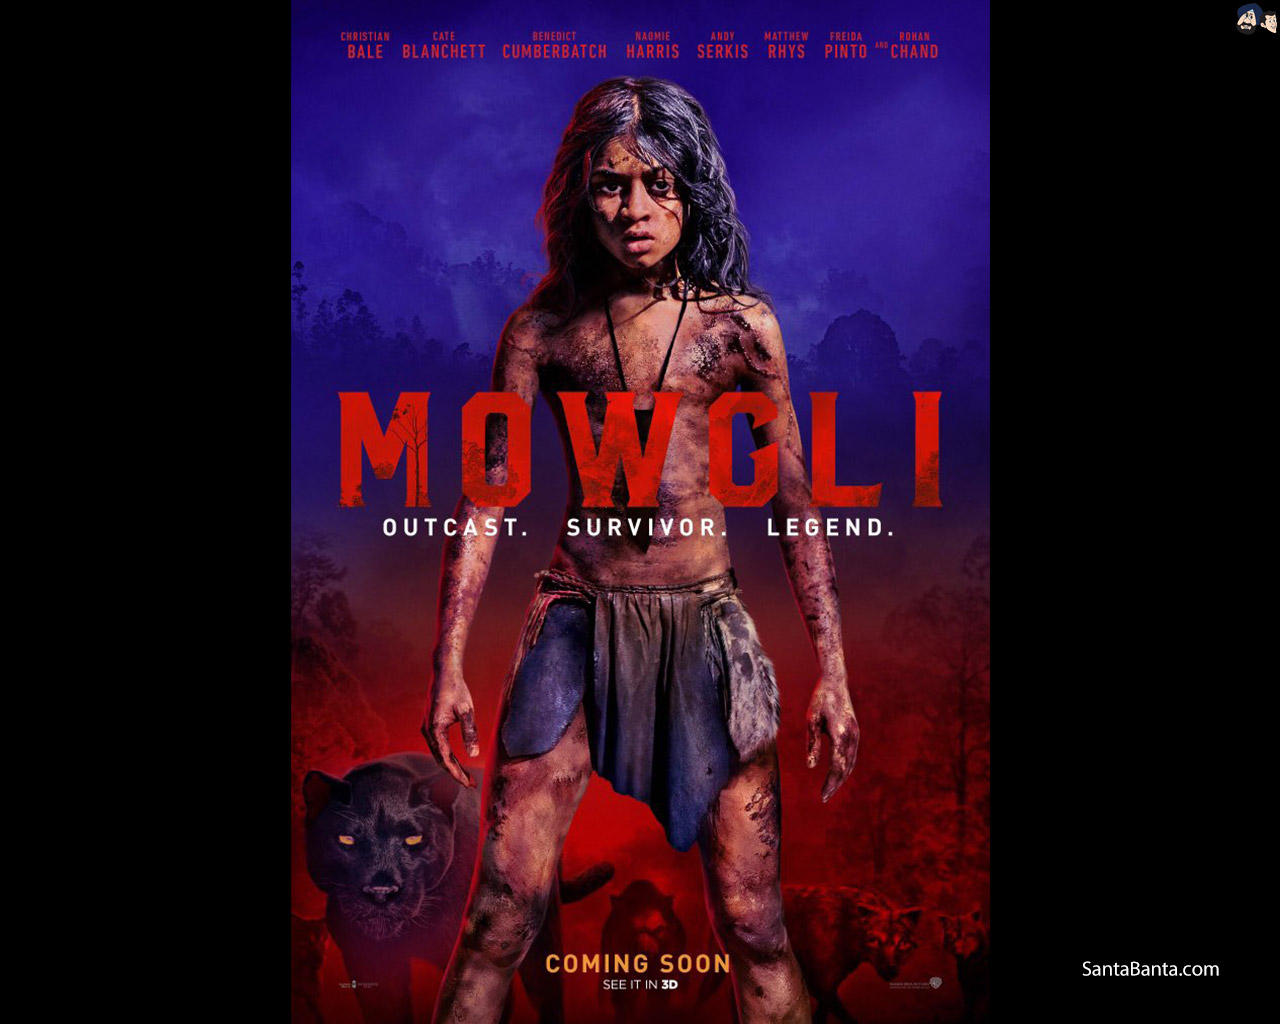 First Look of Hollywood movie, Mowgli (2018) ft. Rohan Chand